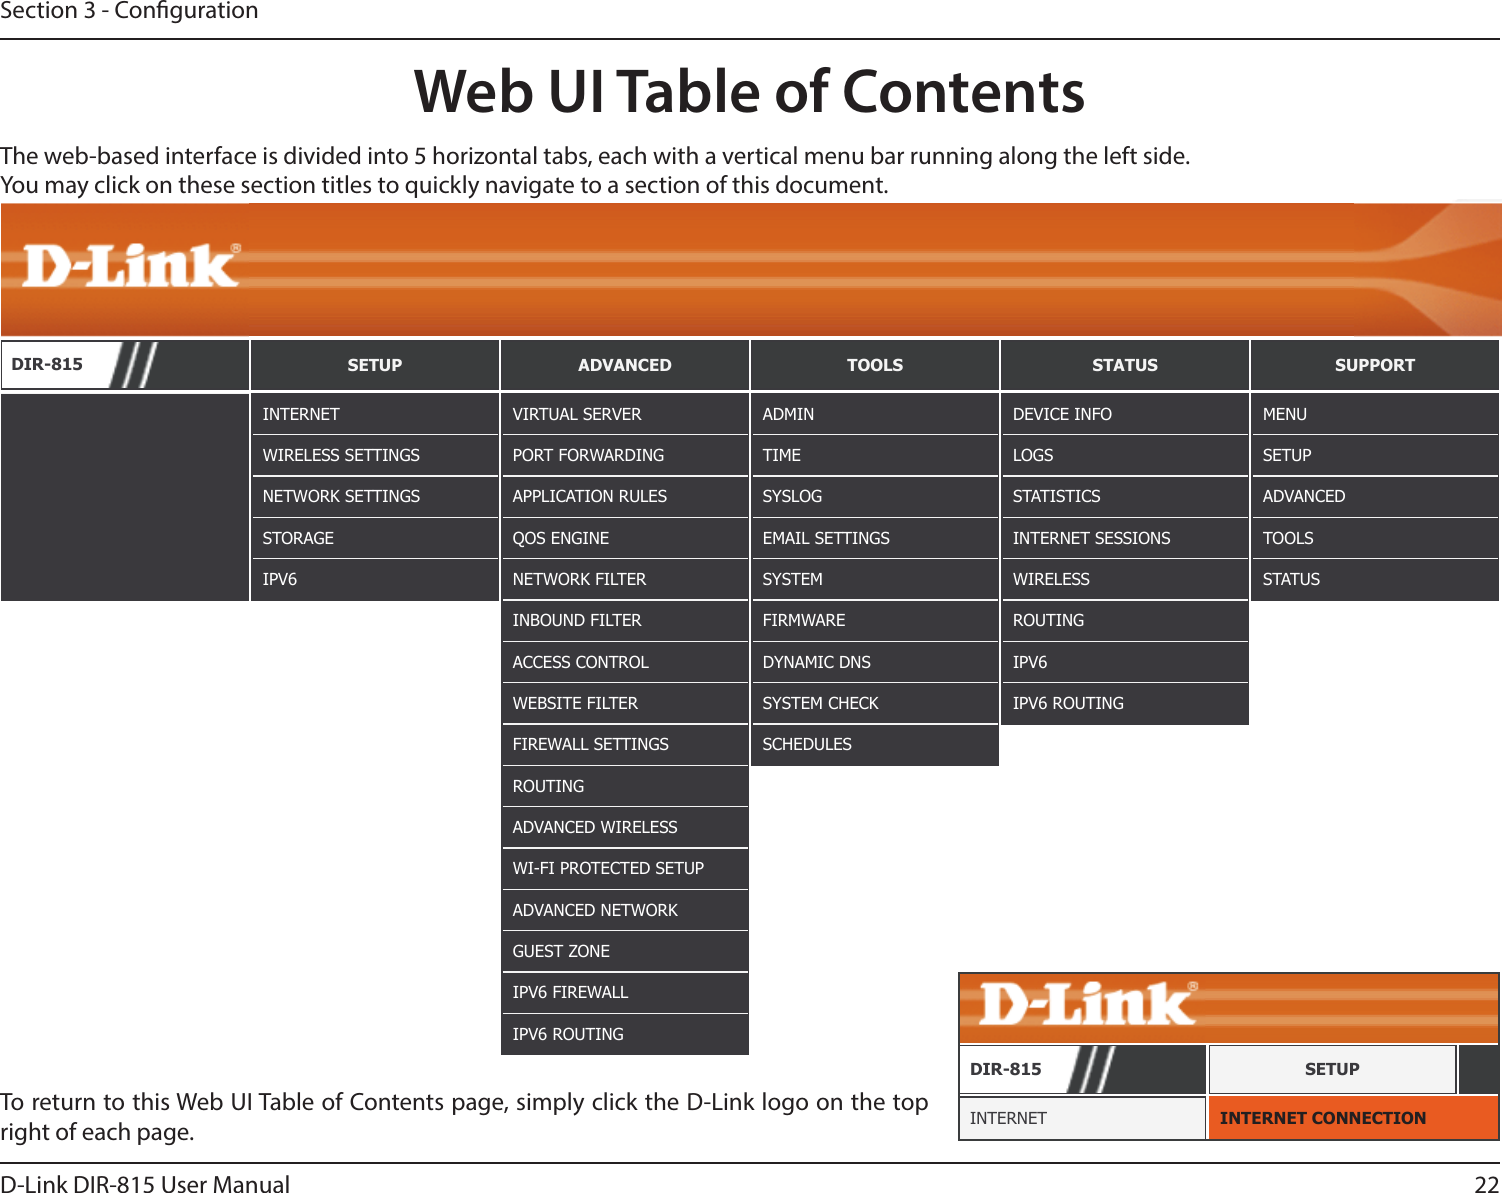 22D-Link DIR-815 User ManualSection 3 - CongurationWeb UI Table of ContentsThe web-based interface is divided into 5 horizontal tabs, each with a vertical menu bar running along the left side. You may click on these section titles to quickly navigate to a section of this document.To return to this Web UI Table of Contents page, simply click the D-Link logo on the top right of each page.DIR-815 SETUP ADVANCED TOOLS STATUS SUPPORTINTERNETWIRELESS SETTINGSNETWORK SETTINGSSTORAGEIPV6ADMINTIMESYSLOGEMAIL SETTINGSSYSTEMFIRMWAREDYNAMIC DNSSYSTEM CHECKSCHEDULESDEVICE INFOLOGSSTATISTICSINTERNET SESSIONSWIRELESSROUTINGIPV6IPV6 ROUTINGMENUSETUPADVANCEDTOOLSSTATUSVIRTUAL SERVERPORT FORWARDINGAPPLICATION RULESQOS ENGINENETWORK FILTERINBOUND FILTERACCESS CONTROLWEBSITE FILTERFIREWALL SETTINGSROUTINGADVANCED WIRELESSWI-FI PROTECTED SETUPADVANCED NETWORKGUEST ZONEIPV6 FIREWALLIPV6 ROUTINGINTERNET CONNECTIONINTERNETDIR-815 SETUP